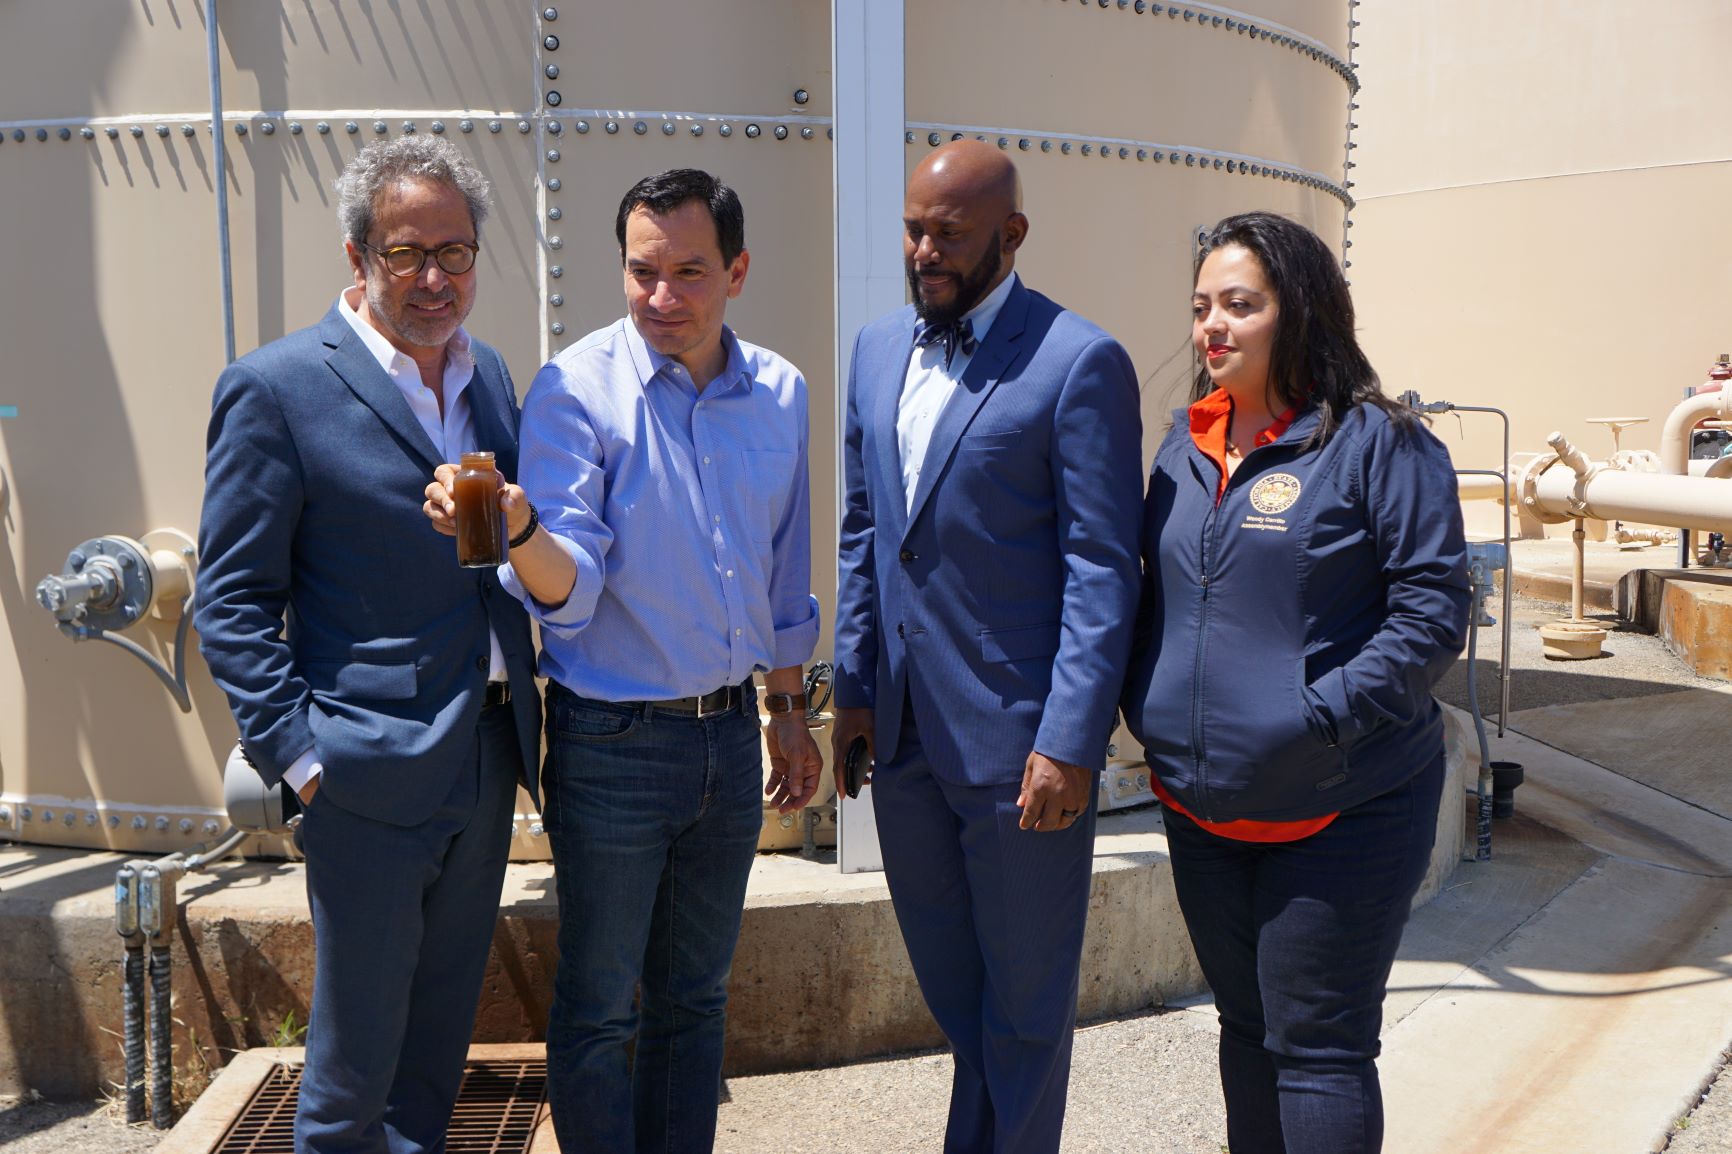 Assemblymember Richard Bloom, Speaker Anthony Rendon, Assemblymember Mike Gipson, and Assemblymember Wendy Carrillo tour Maywood Water Facility, May 2019